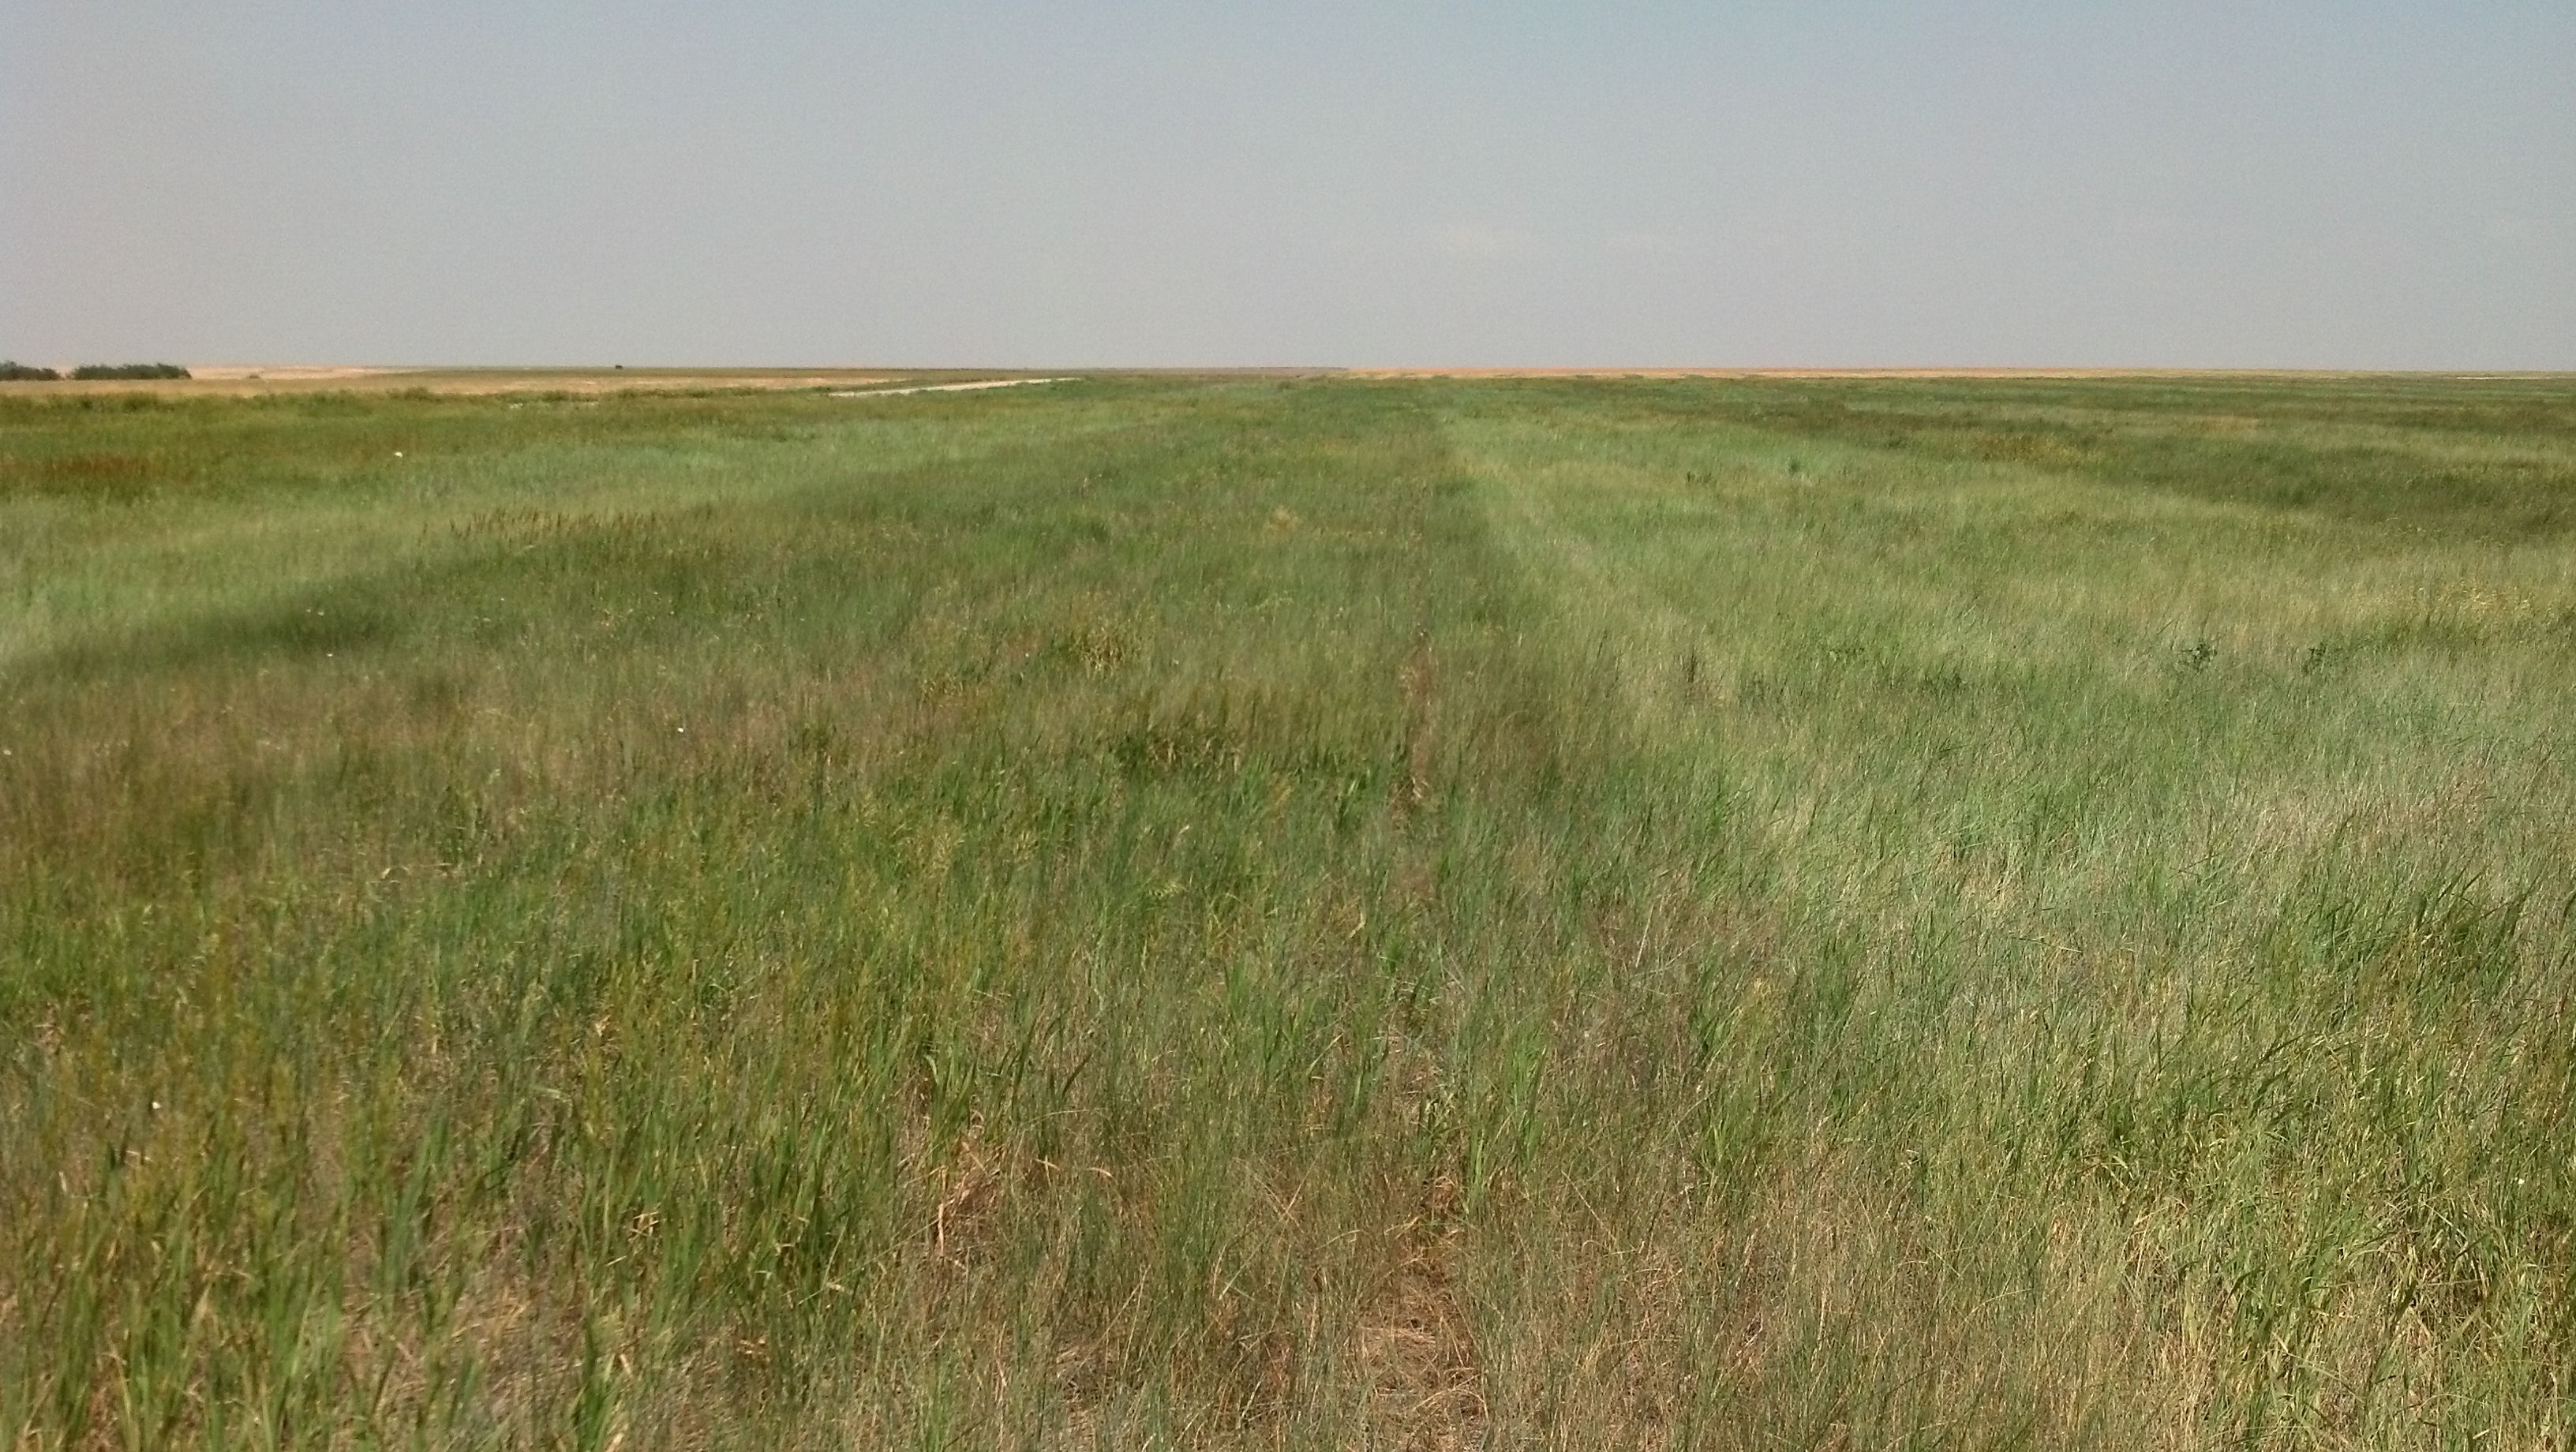 Item 17 in Auction: 160+/- Acres Ness Co. KS gallery